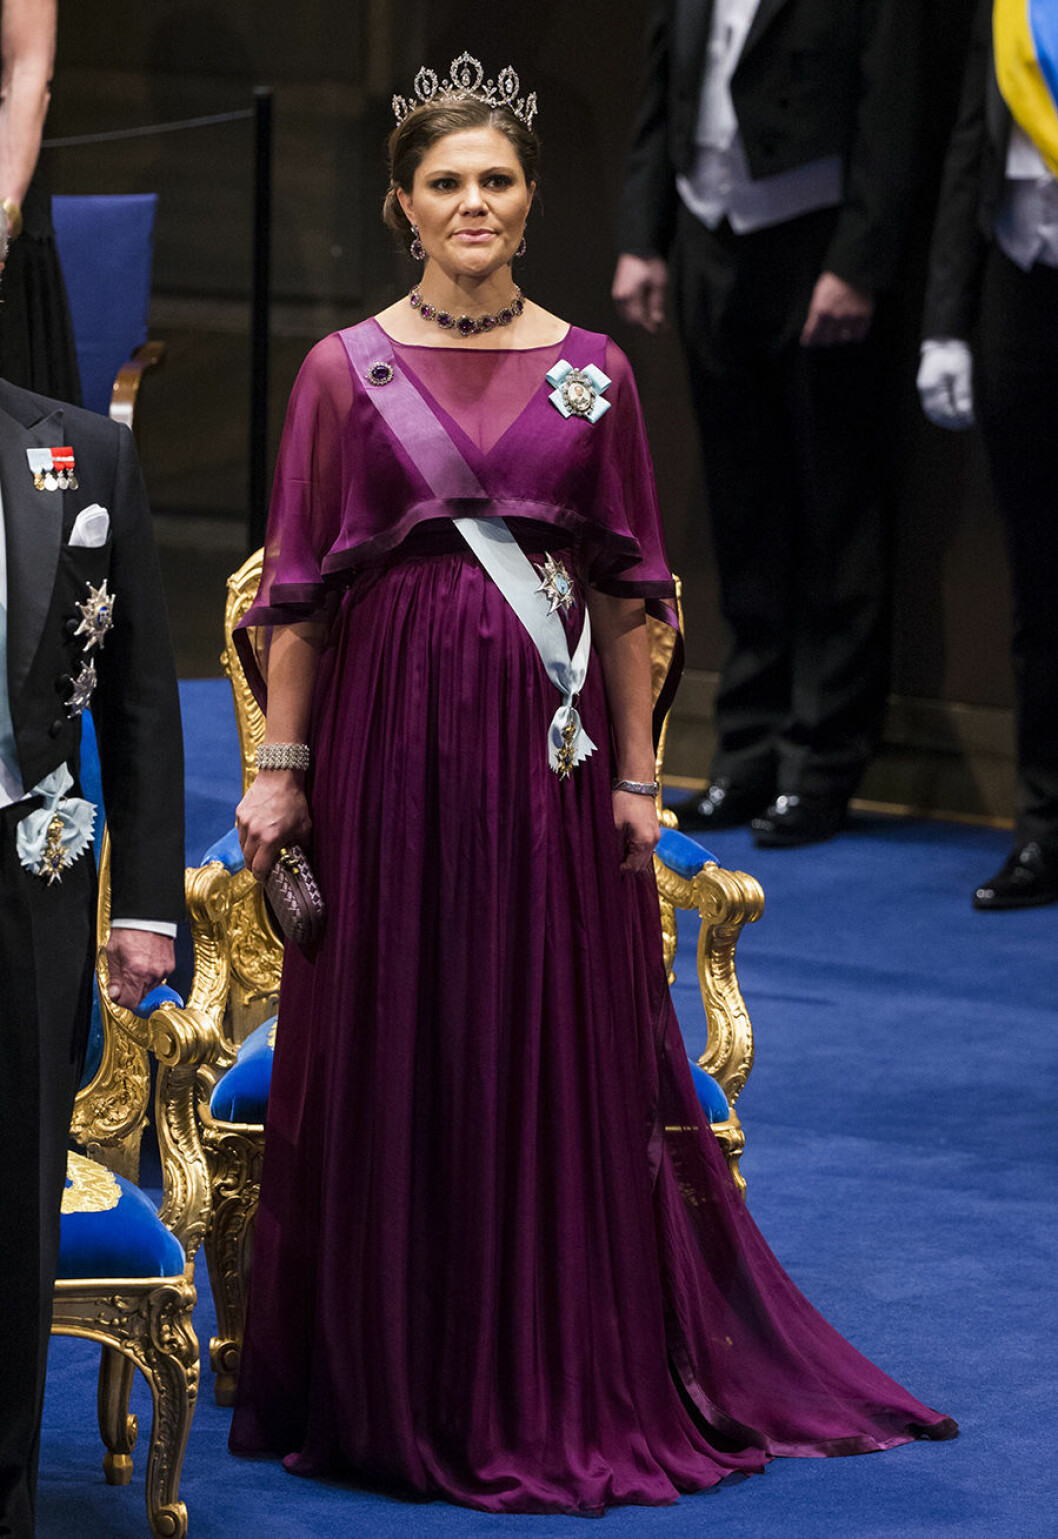 STOCKHOLM 2015-12-10. The Nobel Prize 2015. The Nobel Prize Awards ceremony today took place in the Stockholm Concert Hall, in the presence of the Swedish Royal Family. Picture shows: Crown Princess Victoria COPYRIGHT STELLA PICTURES